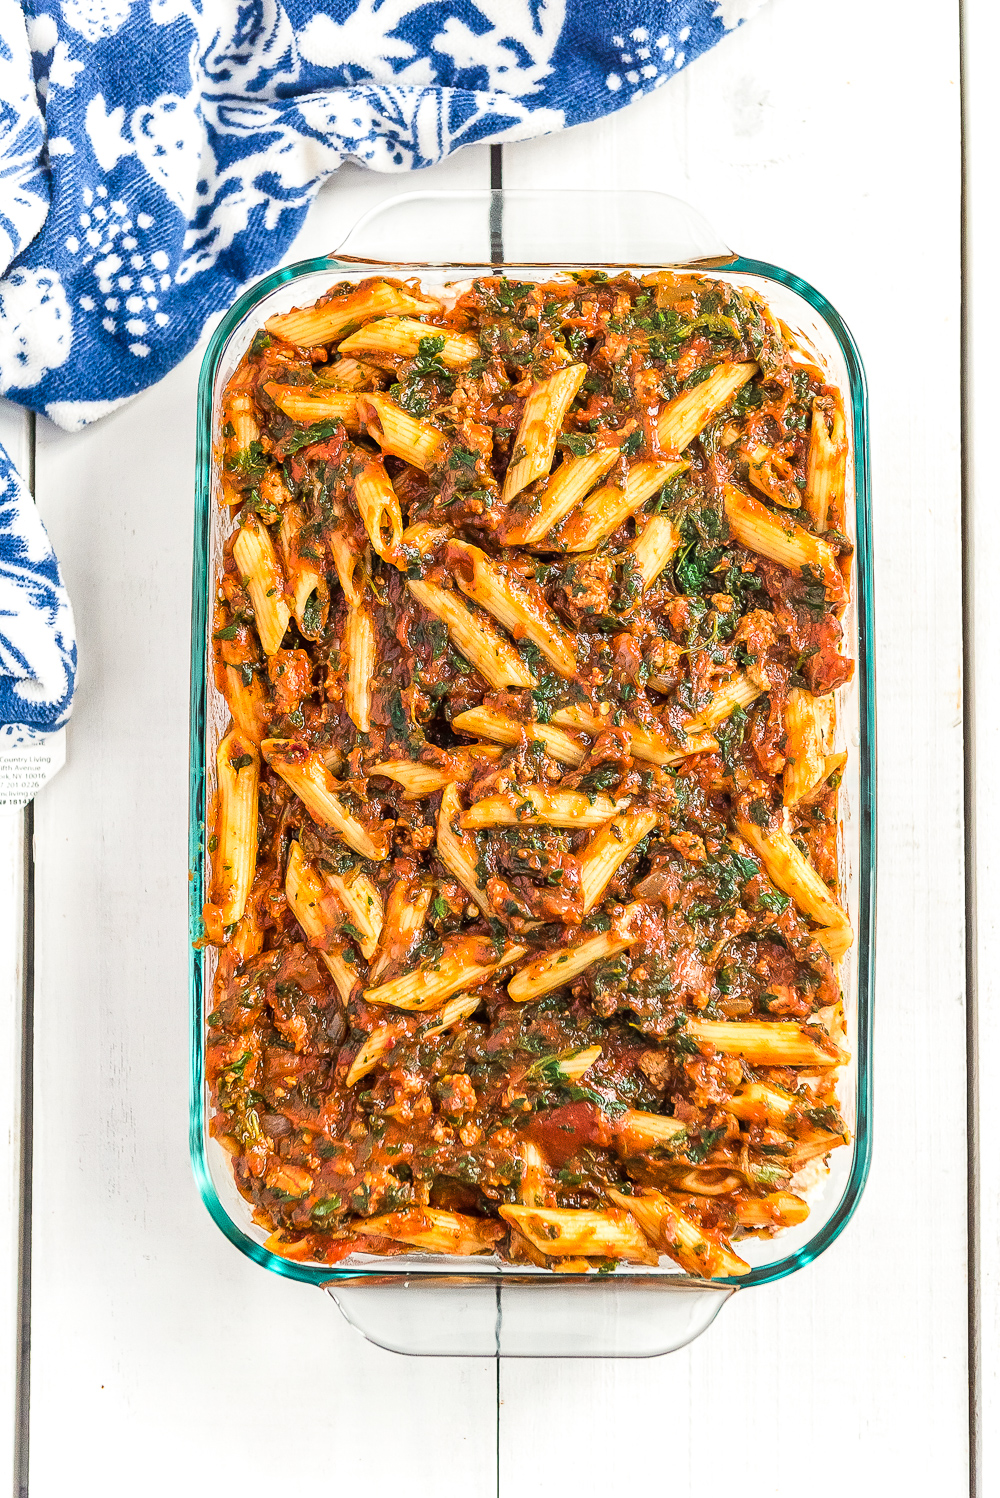 Turkey Florentine pasta bake in a casserole dish on a white table with blue napkin.